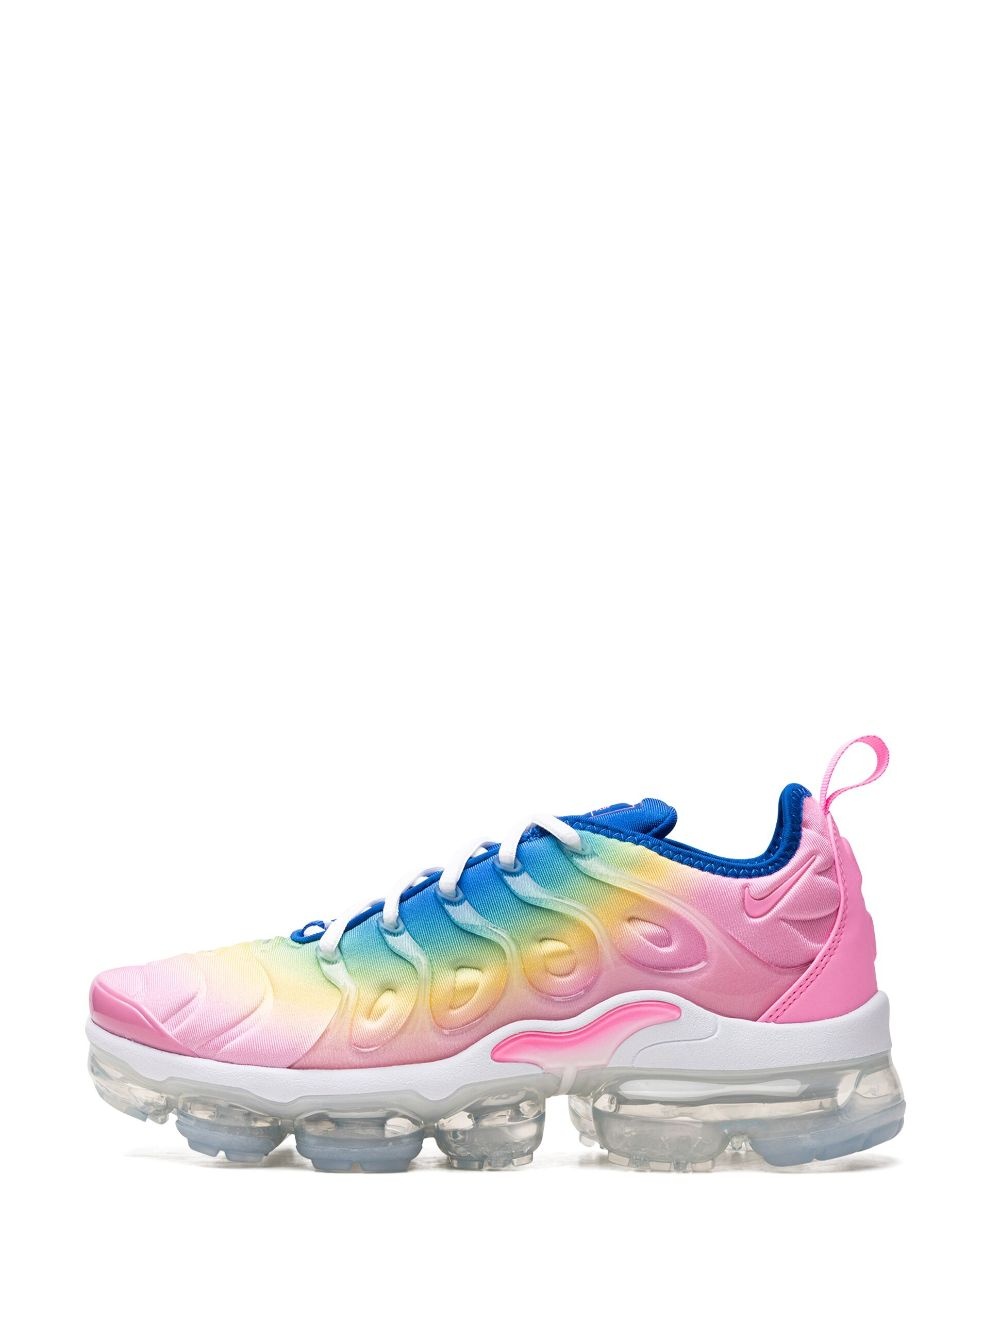 Air VaporMax Plus "Cotton Candy Rainbow" sneakers - 7